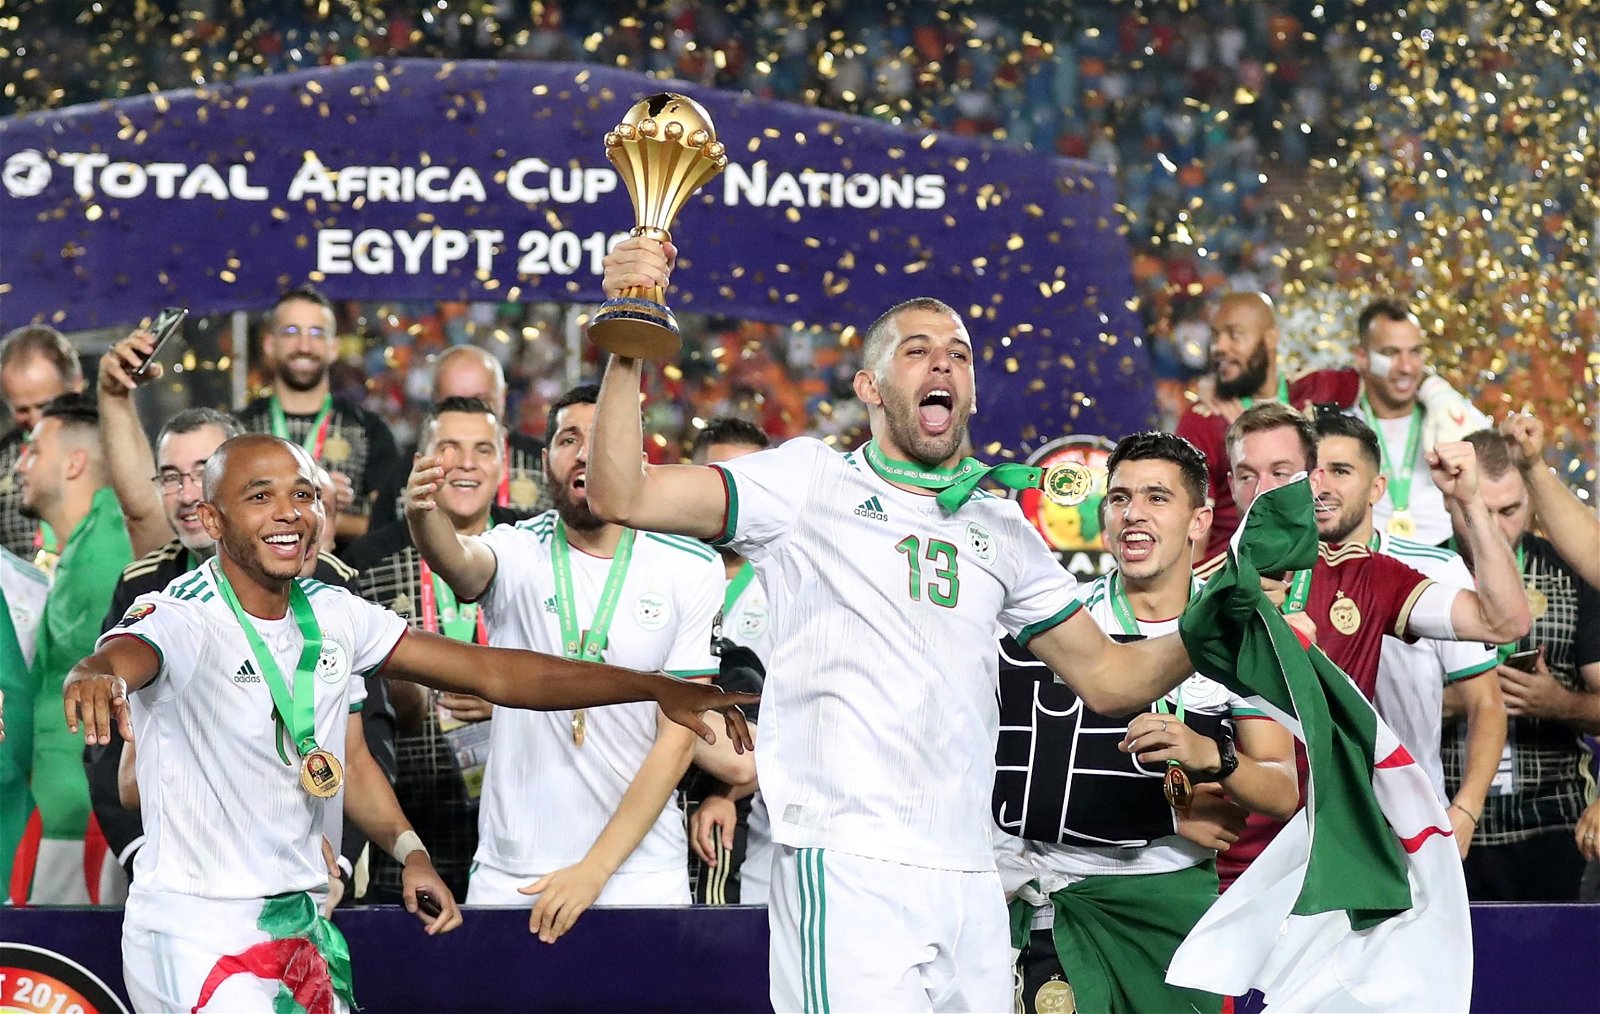  Algeria Africa Cup of Nations squad 2021